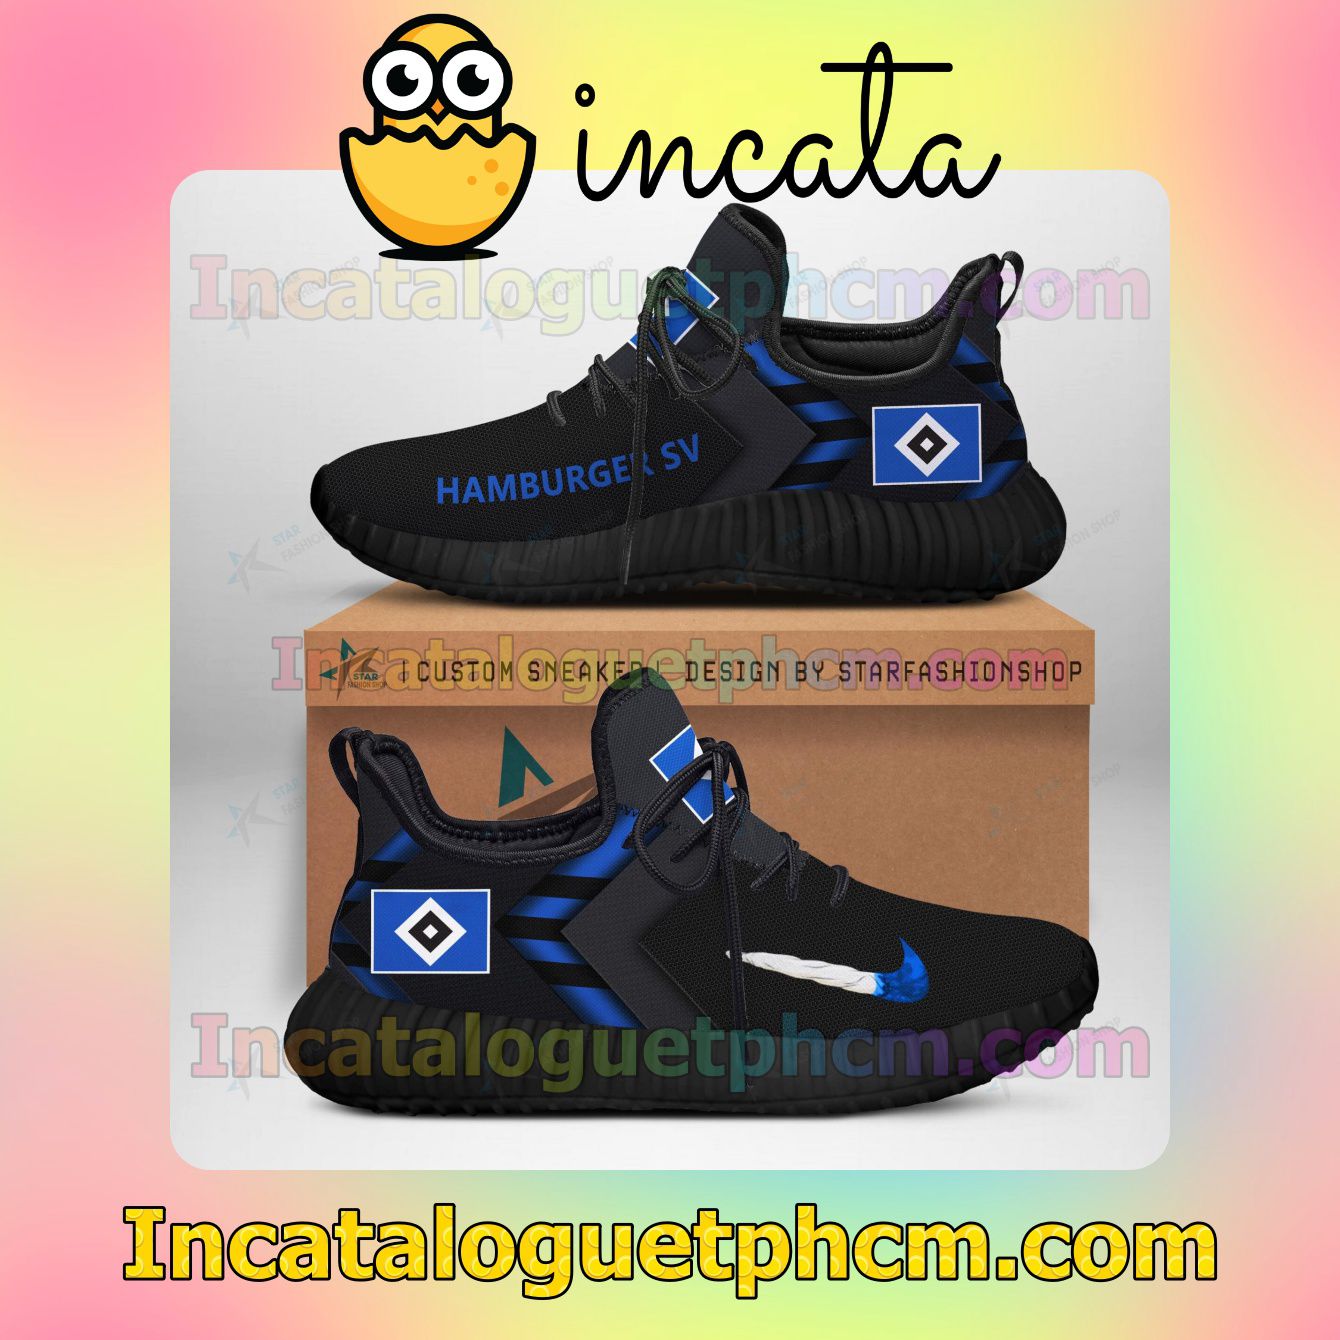 Limited Edition Hamburger SV Ultraboost Yeezy Shoes Sneakers